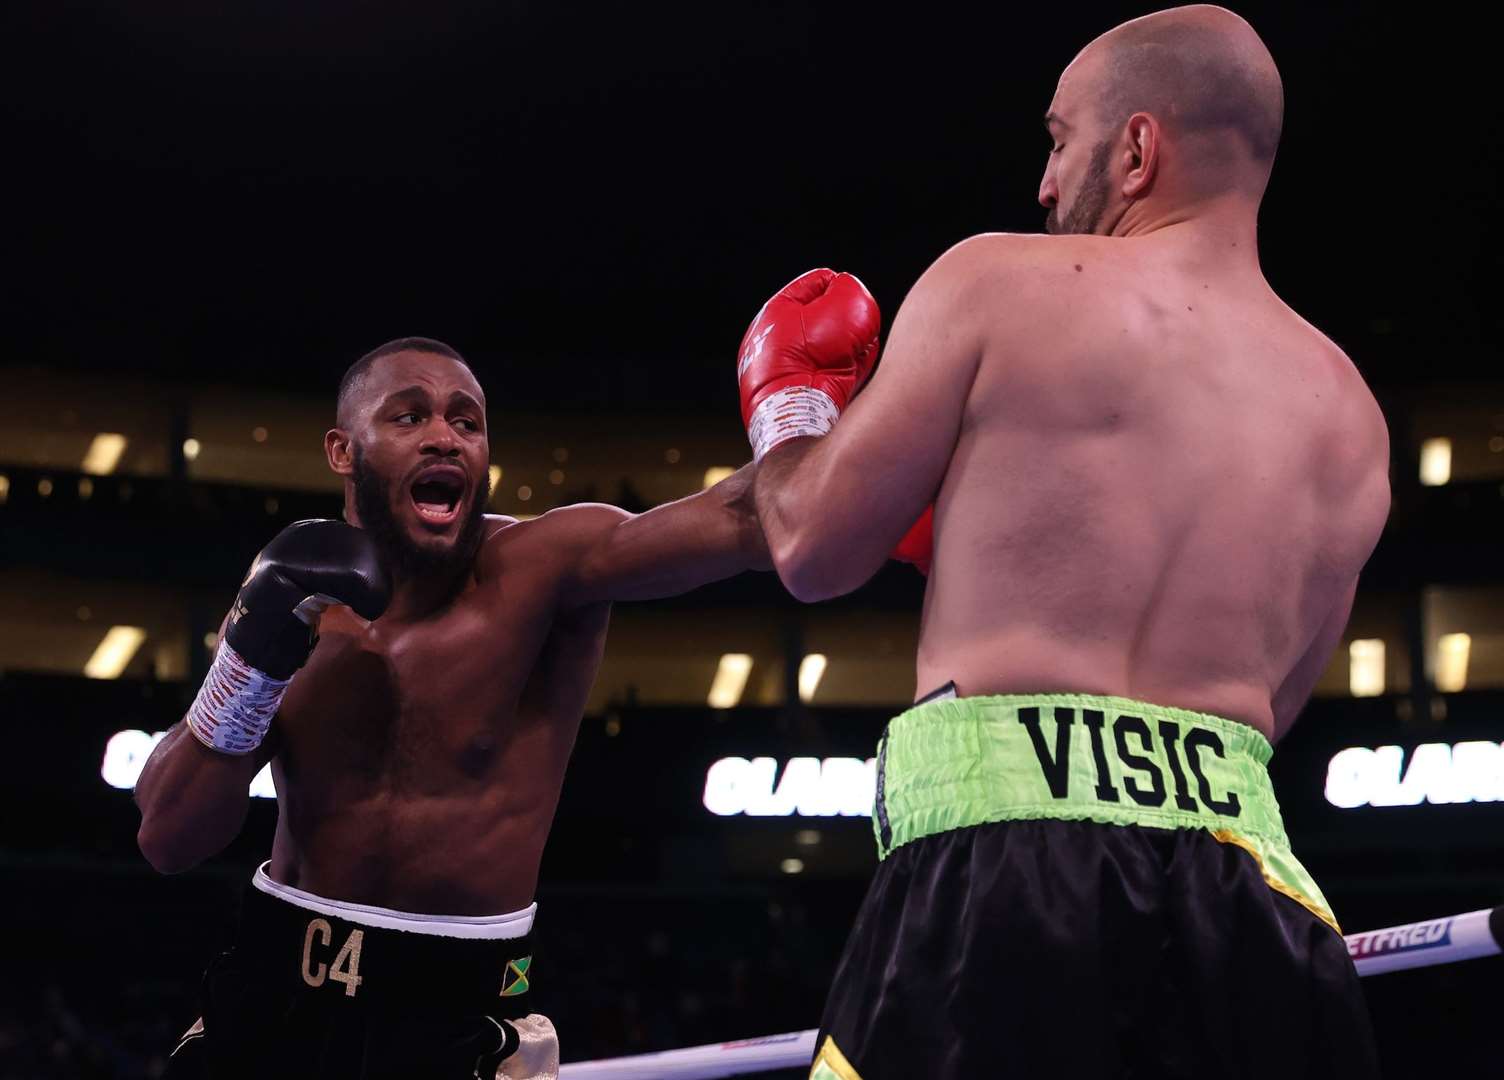 Gravesend's Cheavon Clarke in full flow against Toni Visic. Picture: Mark Robinson/Matchroom Boxing